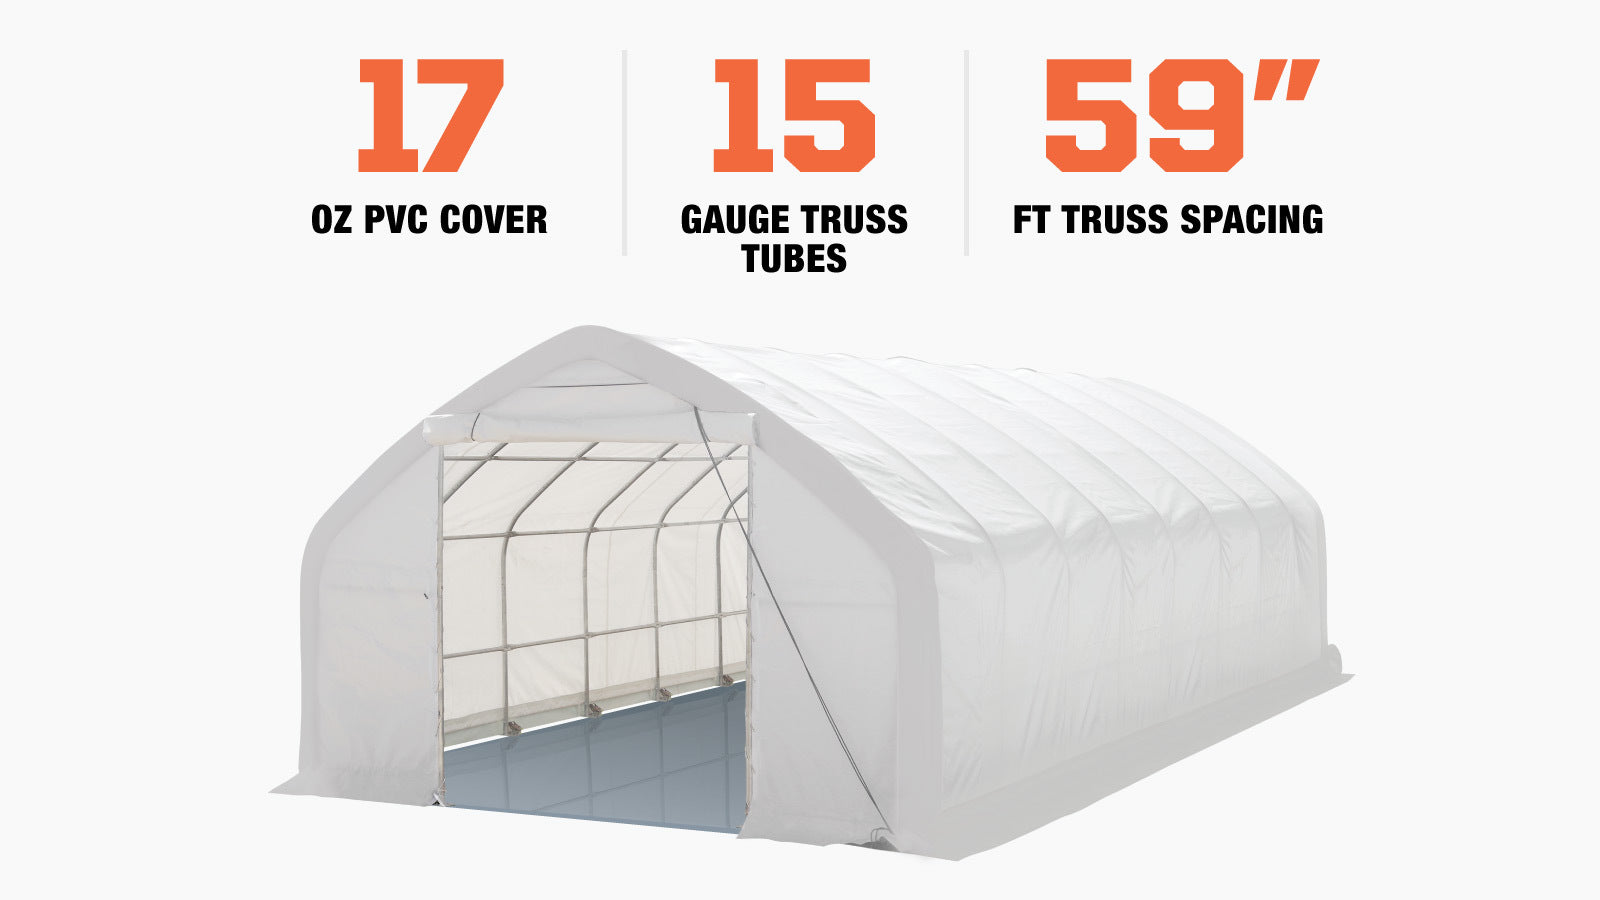 TMG Industrial 20' x 40' Straight Wall Peak Ceiling Storage Shelter with Heavy Duty 17 oz PVC Cover & Drive Through Door, TMG-ST2041V (Previously ST2040V)-description-image